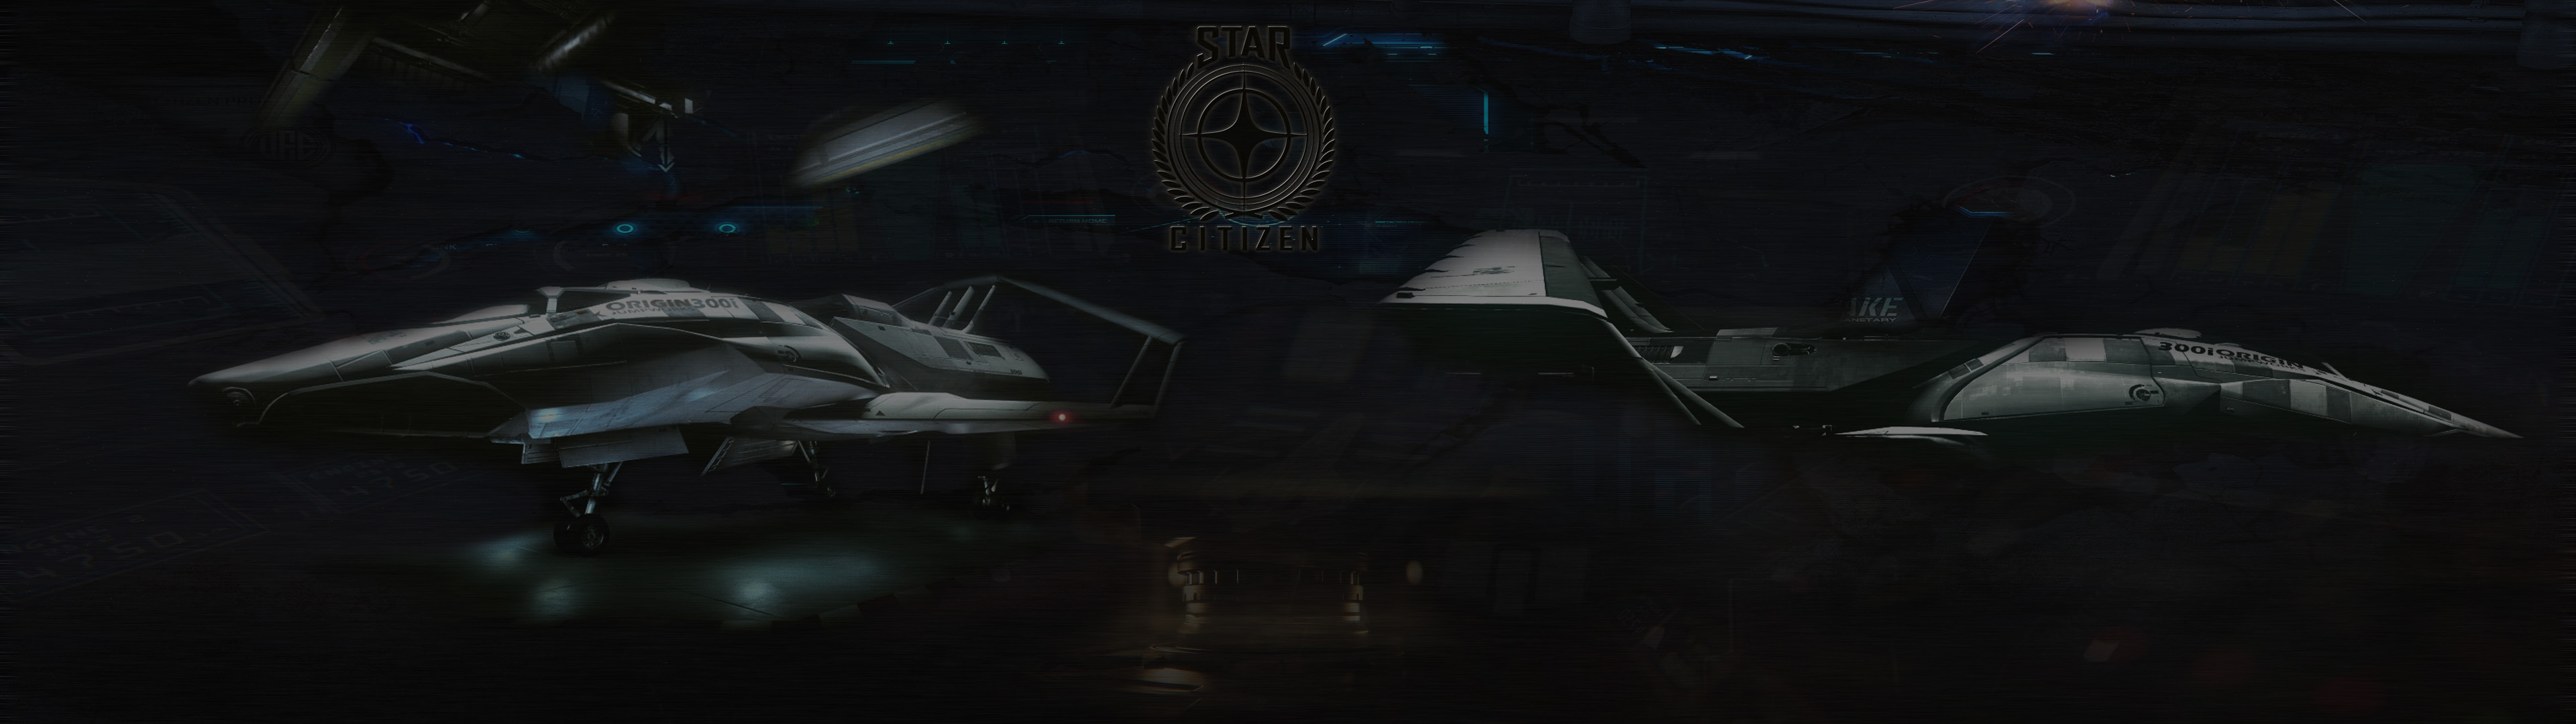 Also Made Up A Star Citizen Wallpaper For Dual Monitors If Anybody